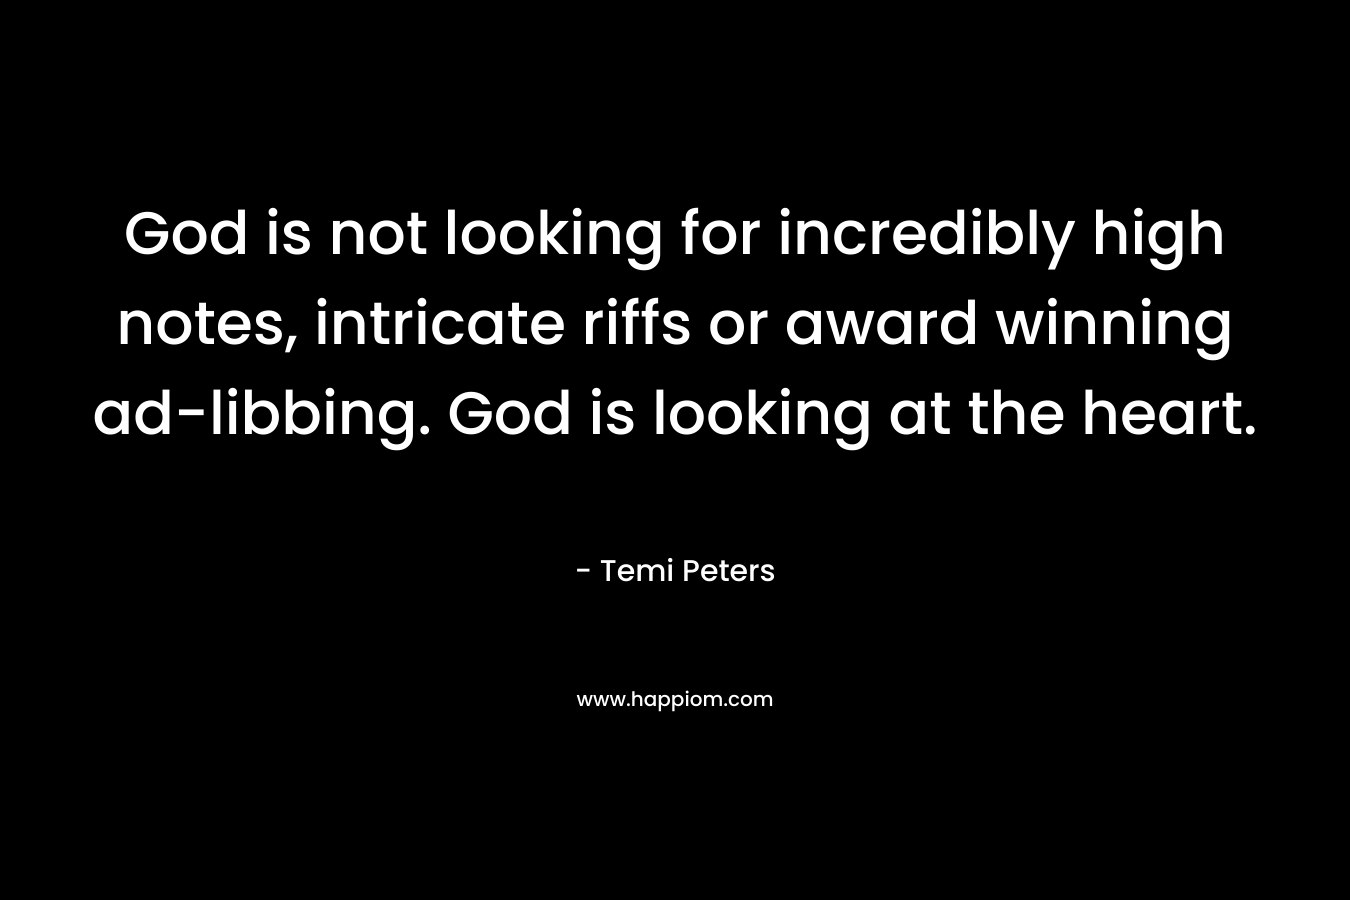 God is not looking for incredibly high notes, intricate riffs or award winning ad-libbing. God is looking at the heart. – Temi Peters